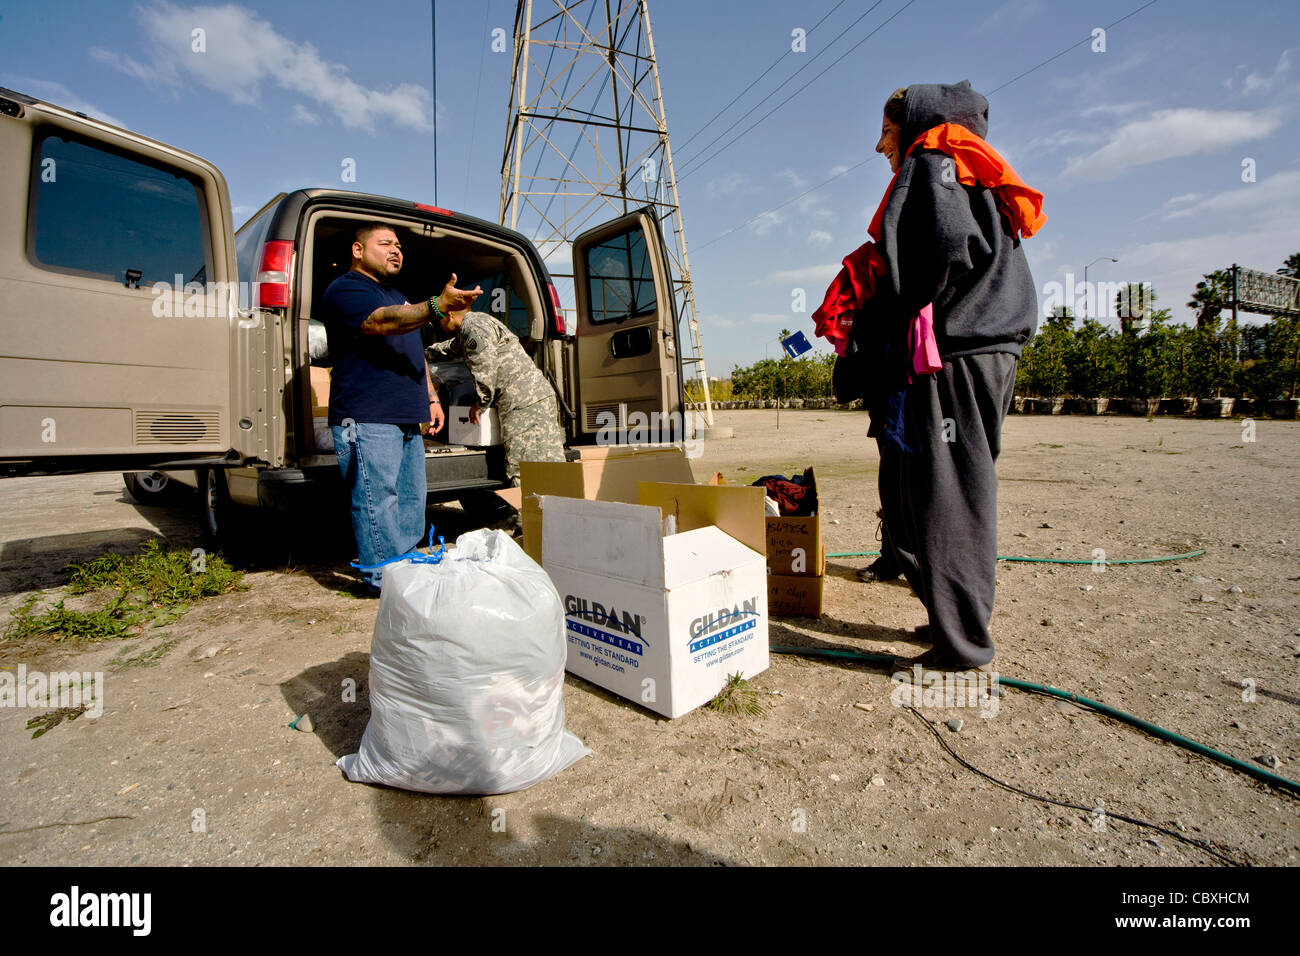 Volunteers from the charitable outreach program Vet Hunters unload food and clothing from an Army truck for homeless veterans. Stock Photo